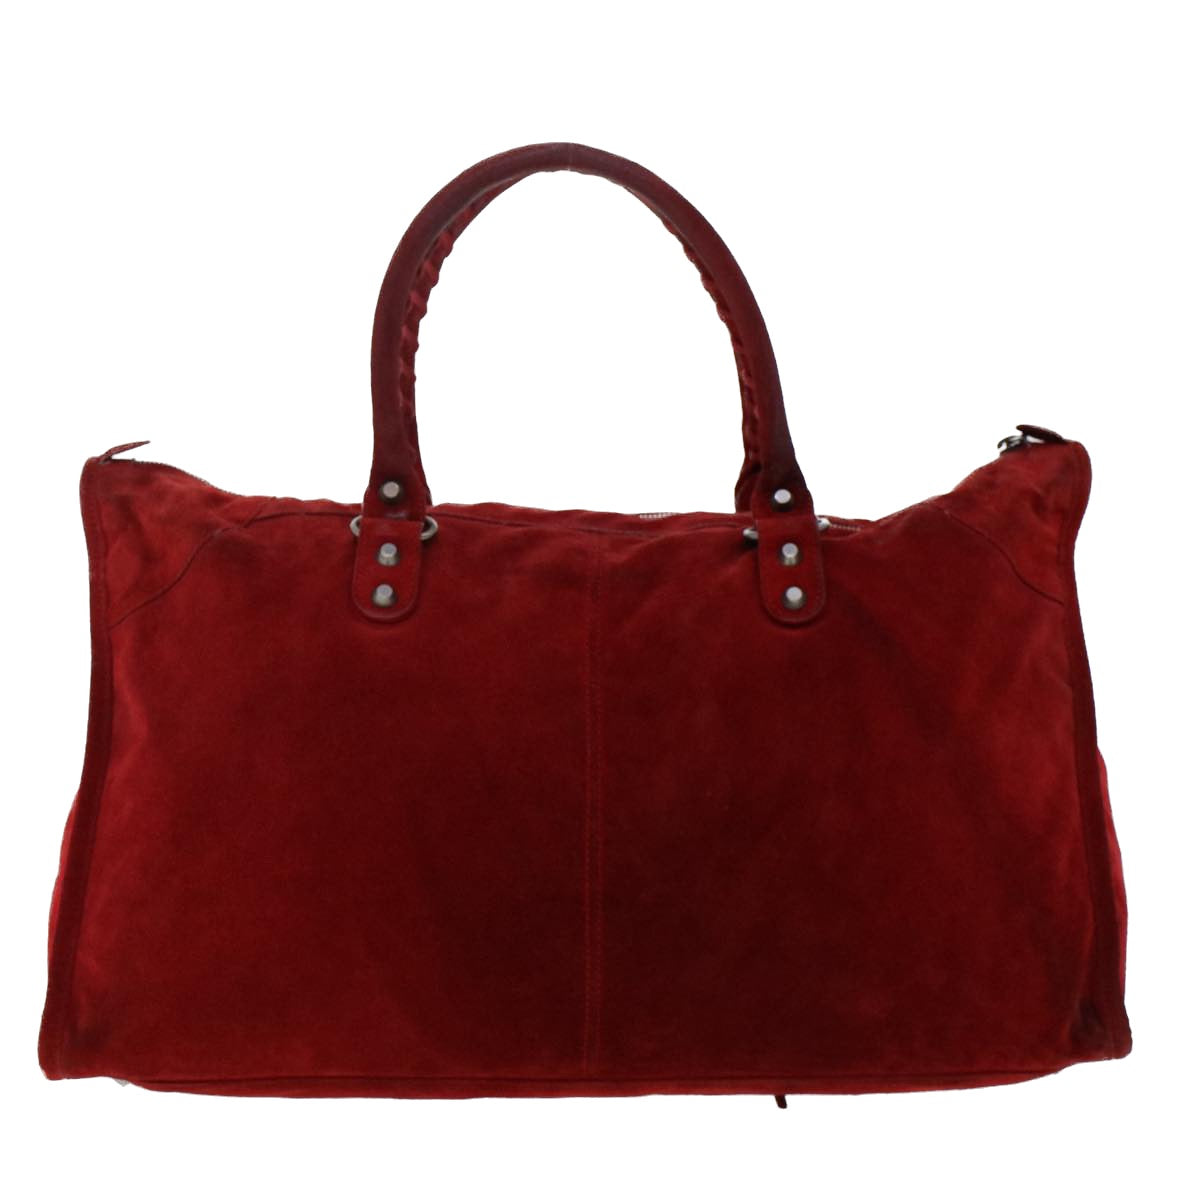 BALENCIAGA The Work Hand Bag Suede Red Auth 49776 - 0